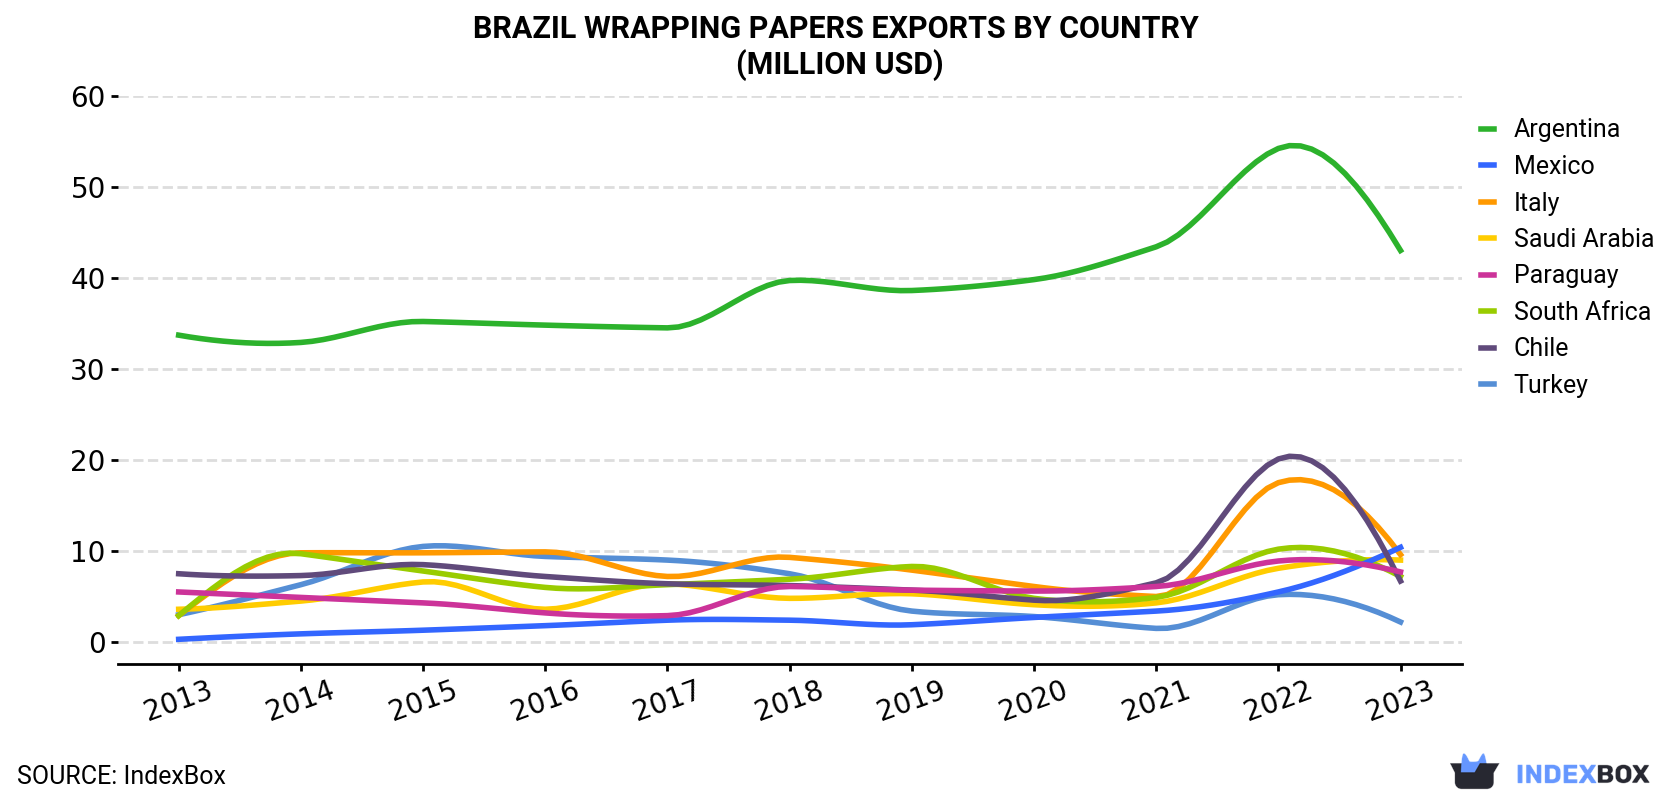 Brazil Wrapping Papers Exports By Country (Million USD)